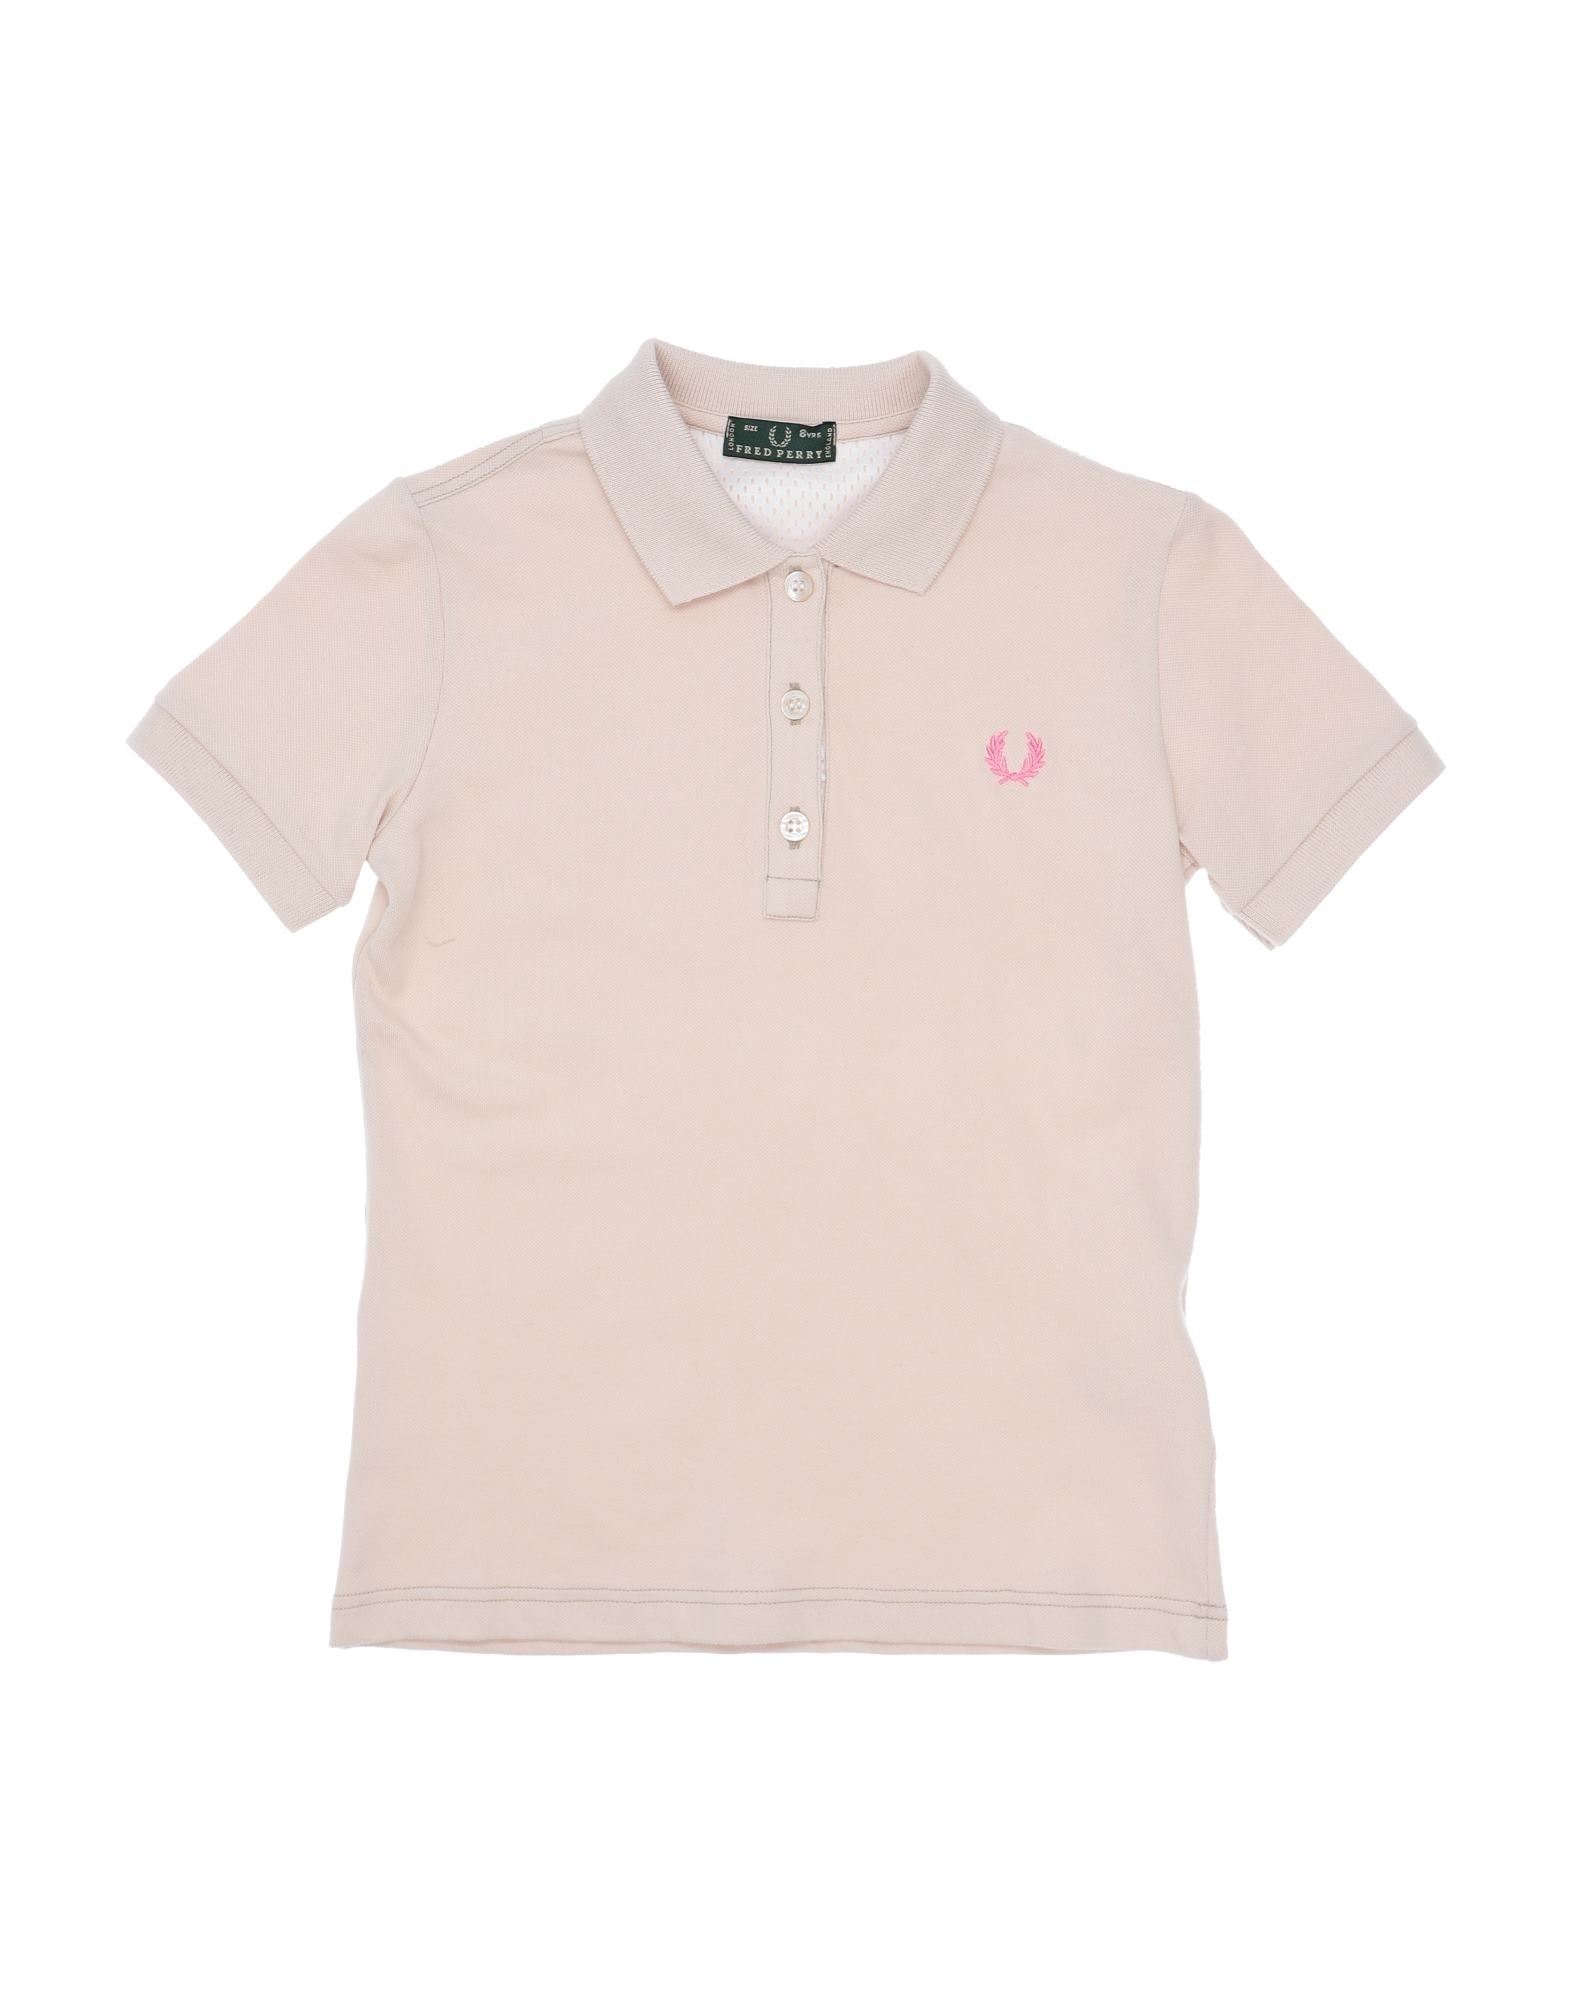 ＜YOOX＞ FRED PERRY ガールズ 3-8 歳 ポロシャツ ペールピンク 8 コットン 95% / ポリウレタン 5%